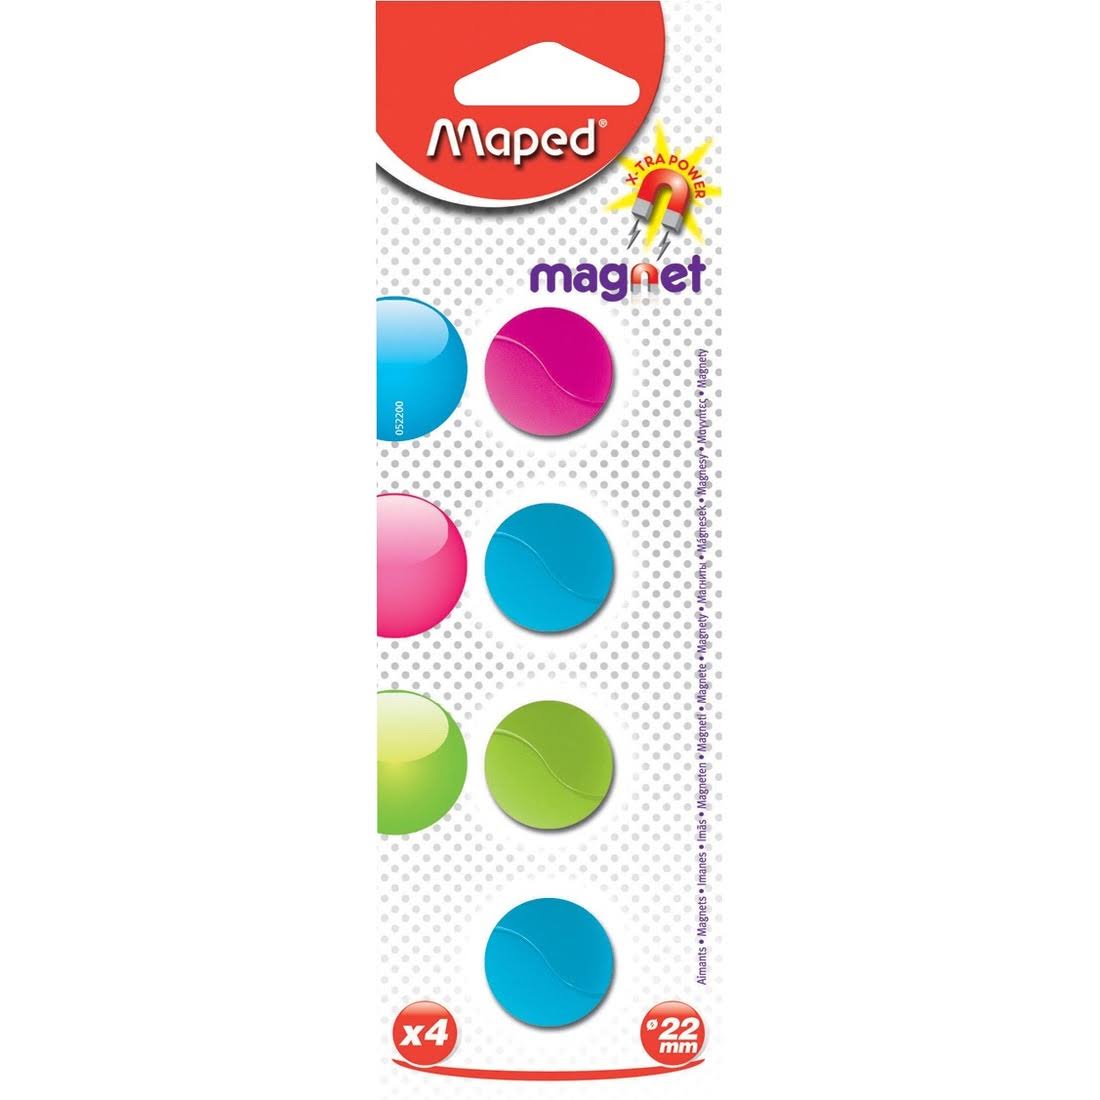 Maped Magnets Round 55/64 Assorted Colours 4/pkg